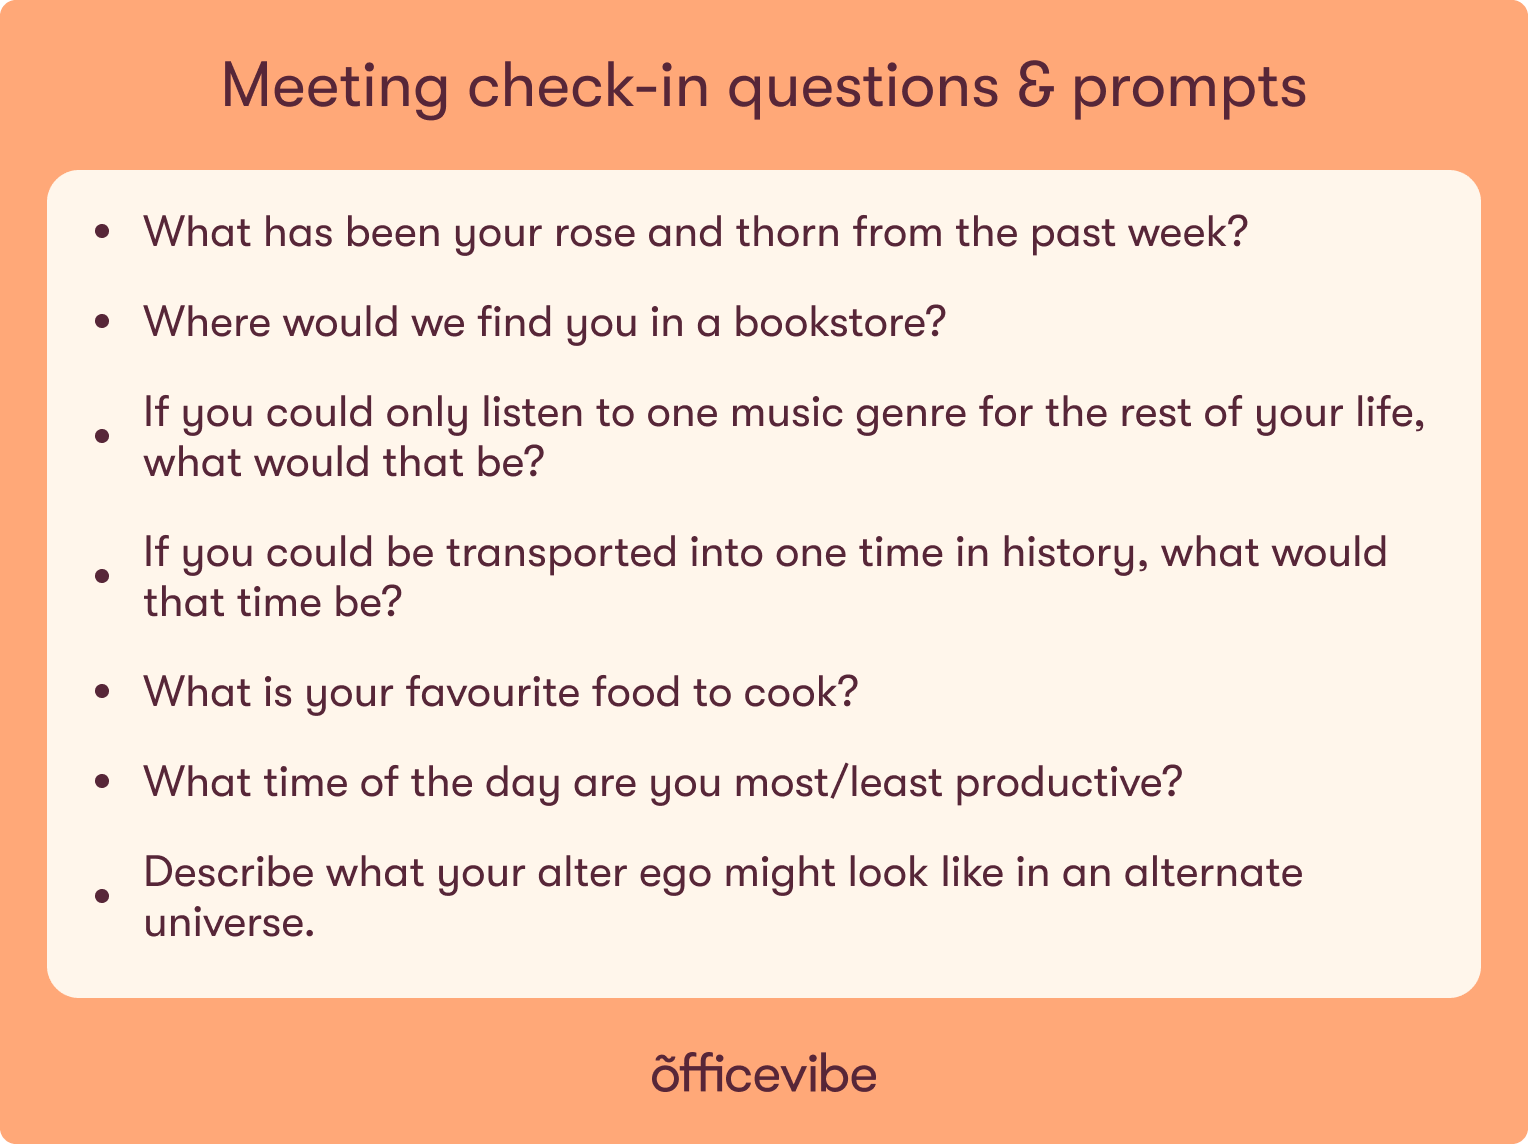 examples of meeting check-in and prompts